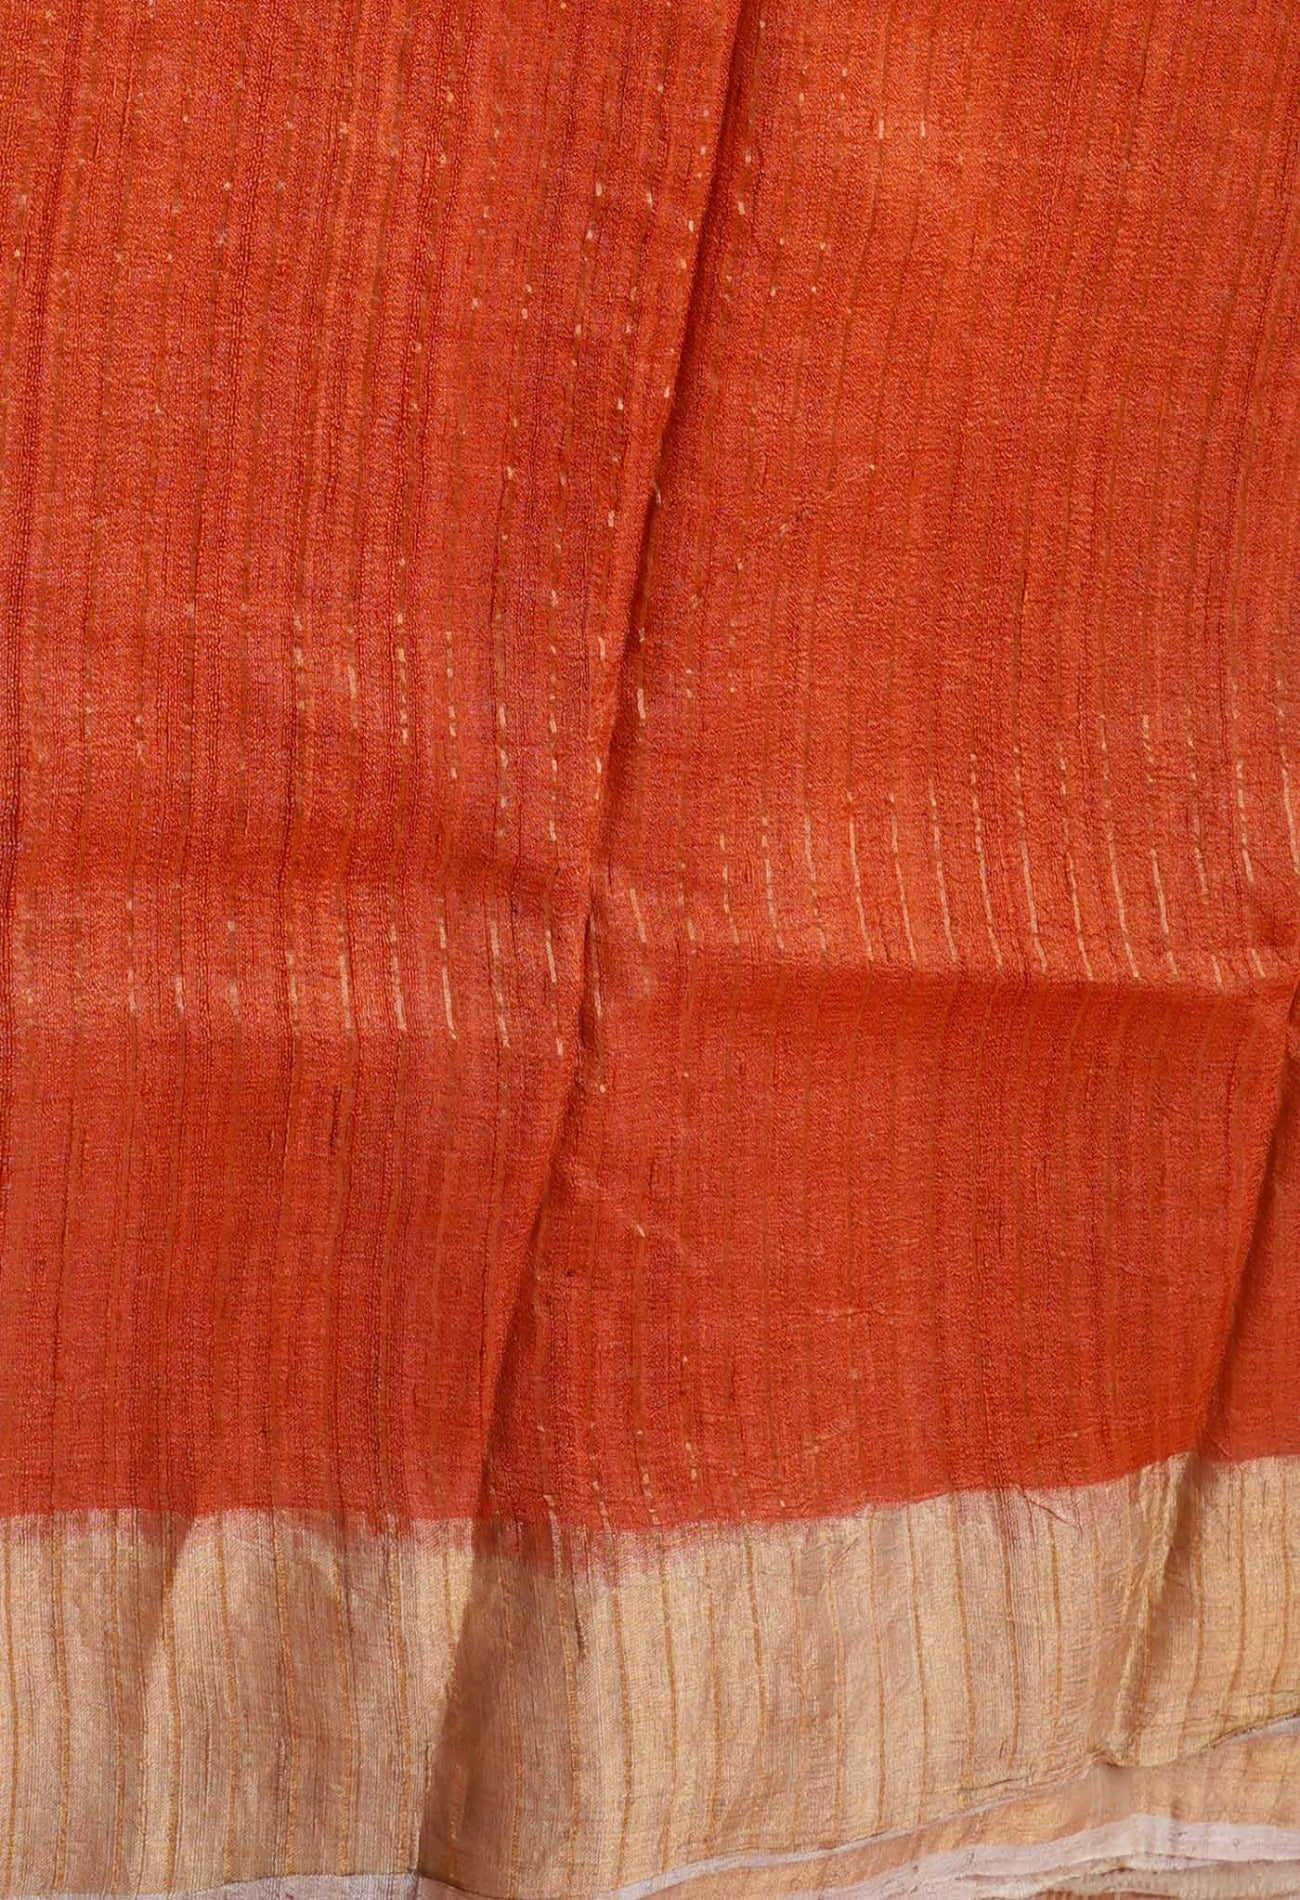 Online Shopping for Orange Pure Handloom Bengal Fusion Print  Silk Saree with Fancy/Ethnic Prints from West Bengal at Unnatisilks.com India
